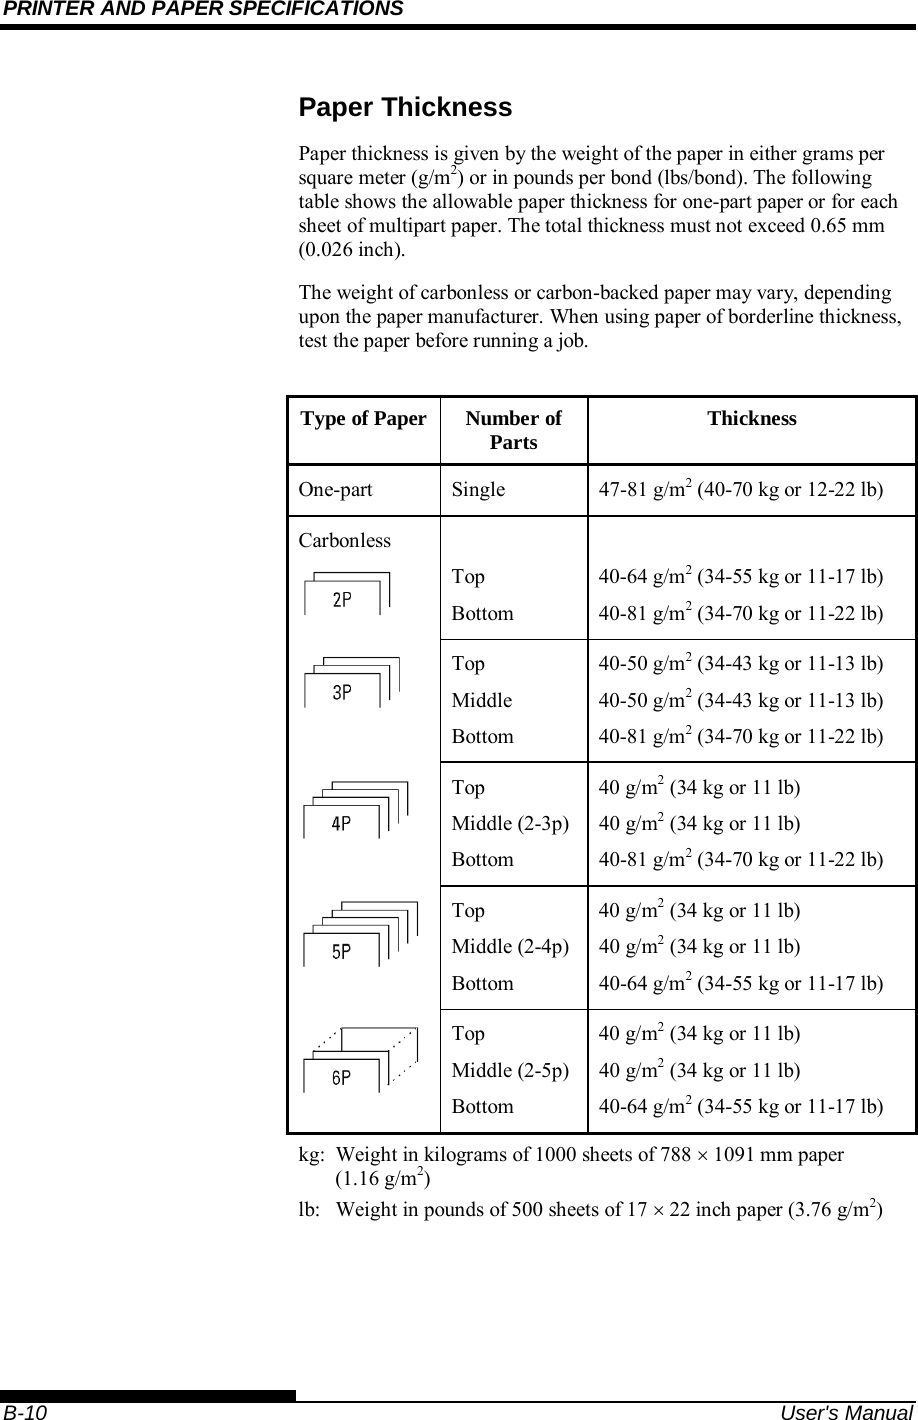 PRINTER AND PAPER SPECIFICATIONS    B-10  User&apos;s Manual Paper Thickness Paper thickness is given by the weight of the paper in either grams per square meter (g/m2) or in pounds per bond (lbs/bond). The following table shows the allowable paper thickness for one-part paper or for each sheet of multipart paper. The total thickness must not exceed 0.65 mm (0.026 inch). The weight of carbonless or carbon-backed paper may vary, depending upon the paper manufacturer. When using paper of borderline thickness, test the paper before running a job.  Type of Paper Number of Parts  Thickness One-part Single  47-81 g/m2 (40-70 kg or 12-22 lb) Carbonless  Top Bottom  40-64 g/m2 (34-55 kg or 11-17 lb) 40-81 g/m2 (34-70 kg or 11-22 lb) Top Middle Bottom 40-50 g/m2 (34-43 kg or 11-13 lb) 40-50 g/m2 (34-43 kg or 11-13 lb) 40-81 g/m2 (34-70 kg or 11-22 lb) Top Middle (2-3p)Bottom 40 g/m2 (34 kg or 11 lb) 40 g/m2 (34 kg or 11 lb) 40-81 g/m2 (34-70 kg or 11-22 lb) Top Middle (2-4p)Bottom 40 g/m2 (34 kg or 11 lb) 40 g/m2 (34 kg or 11 lb) 40-64 g/m2 (34-55 kg or 11-17 lb) Top Middle (2-5p)Bottom 40 g/m2 (34 kg or 11 lb) 40 g/m2 (34 kg or 11 lb) 40-64 g/m2 (34-55 kg or 11-17 lb) kg:  Weight in kilograms of 1000 sheets of 788  1091 mm paper (1.16 g/m2) lb:  Weight in pounds of 500 sheets of 17  22 inch paper (3.76 g/m2)   